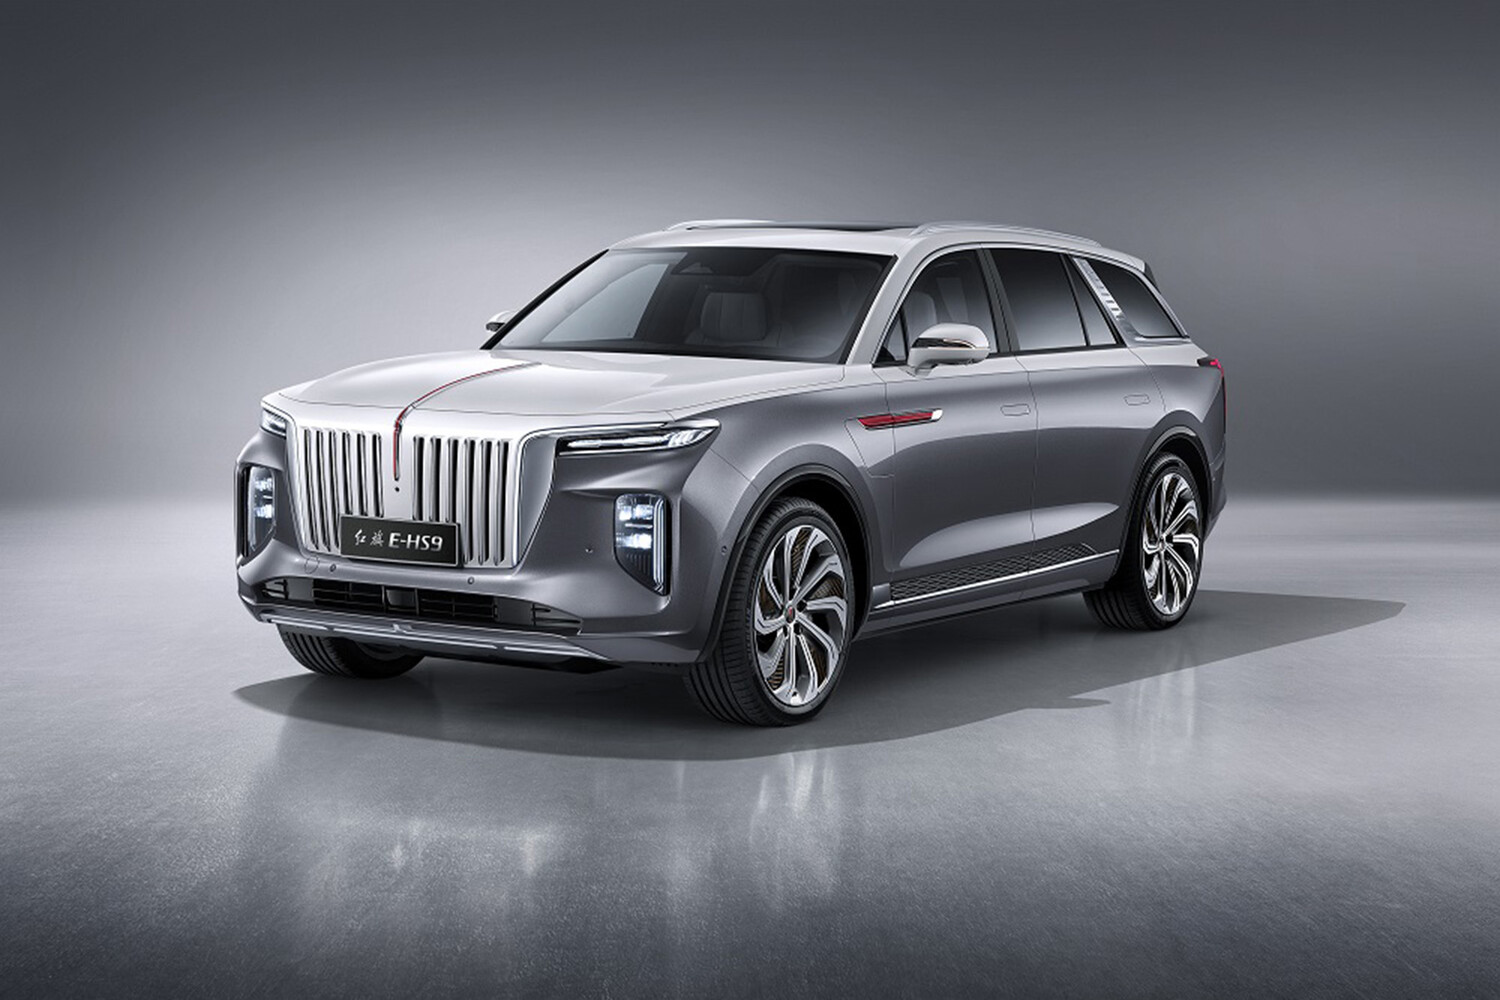 Chinese autolux enters the Russian market: Hongqi cars will be on sale in Russia by the end of June